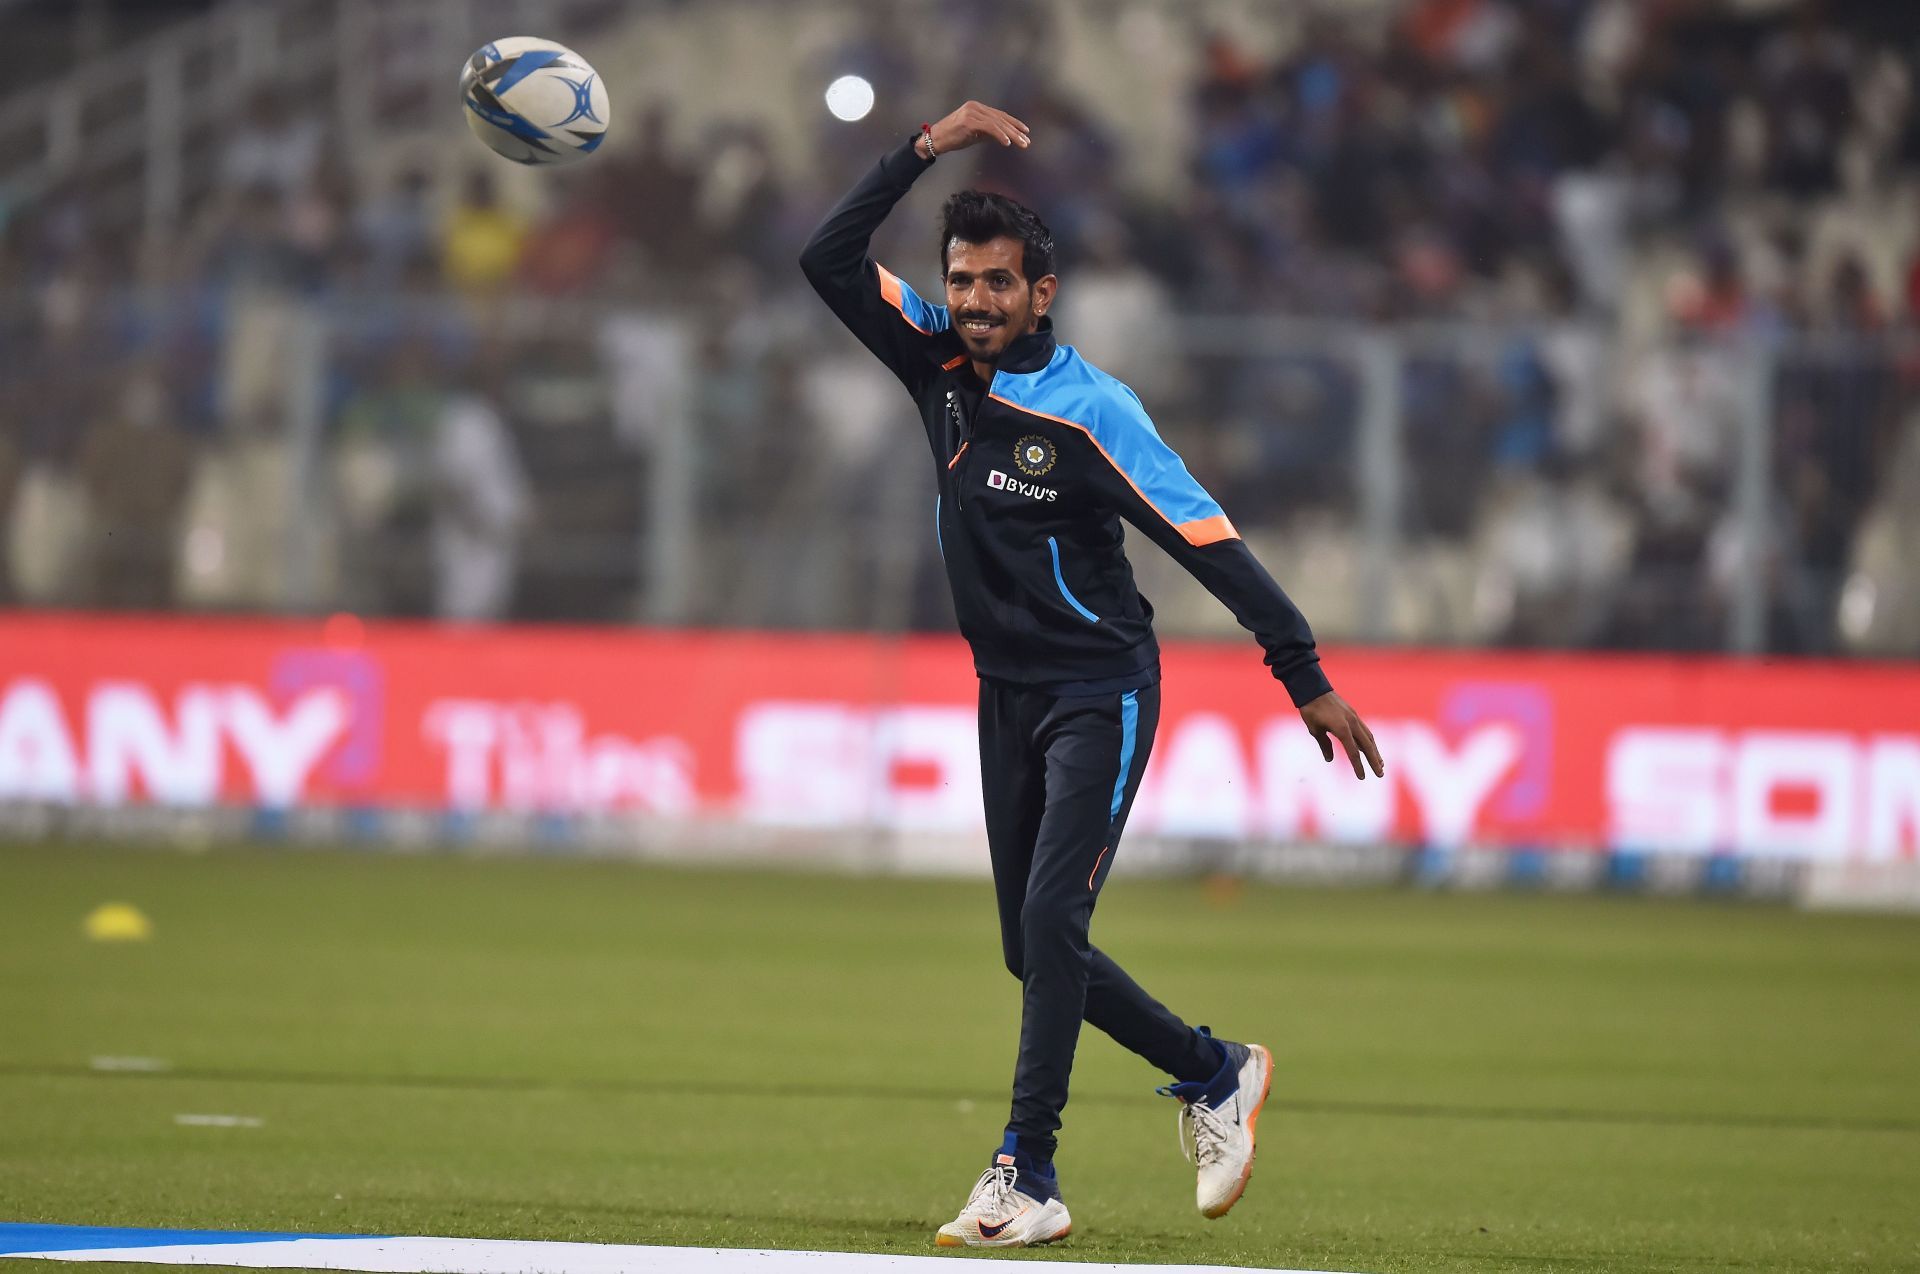 Yuzvendra Chahal has been released by the Royal Challengers Bangalore ahead of the IPL 2022 Auction